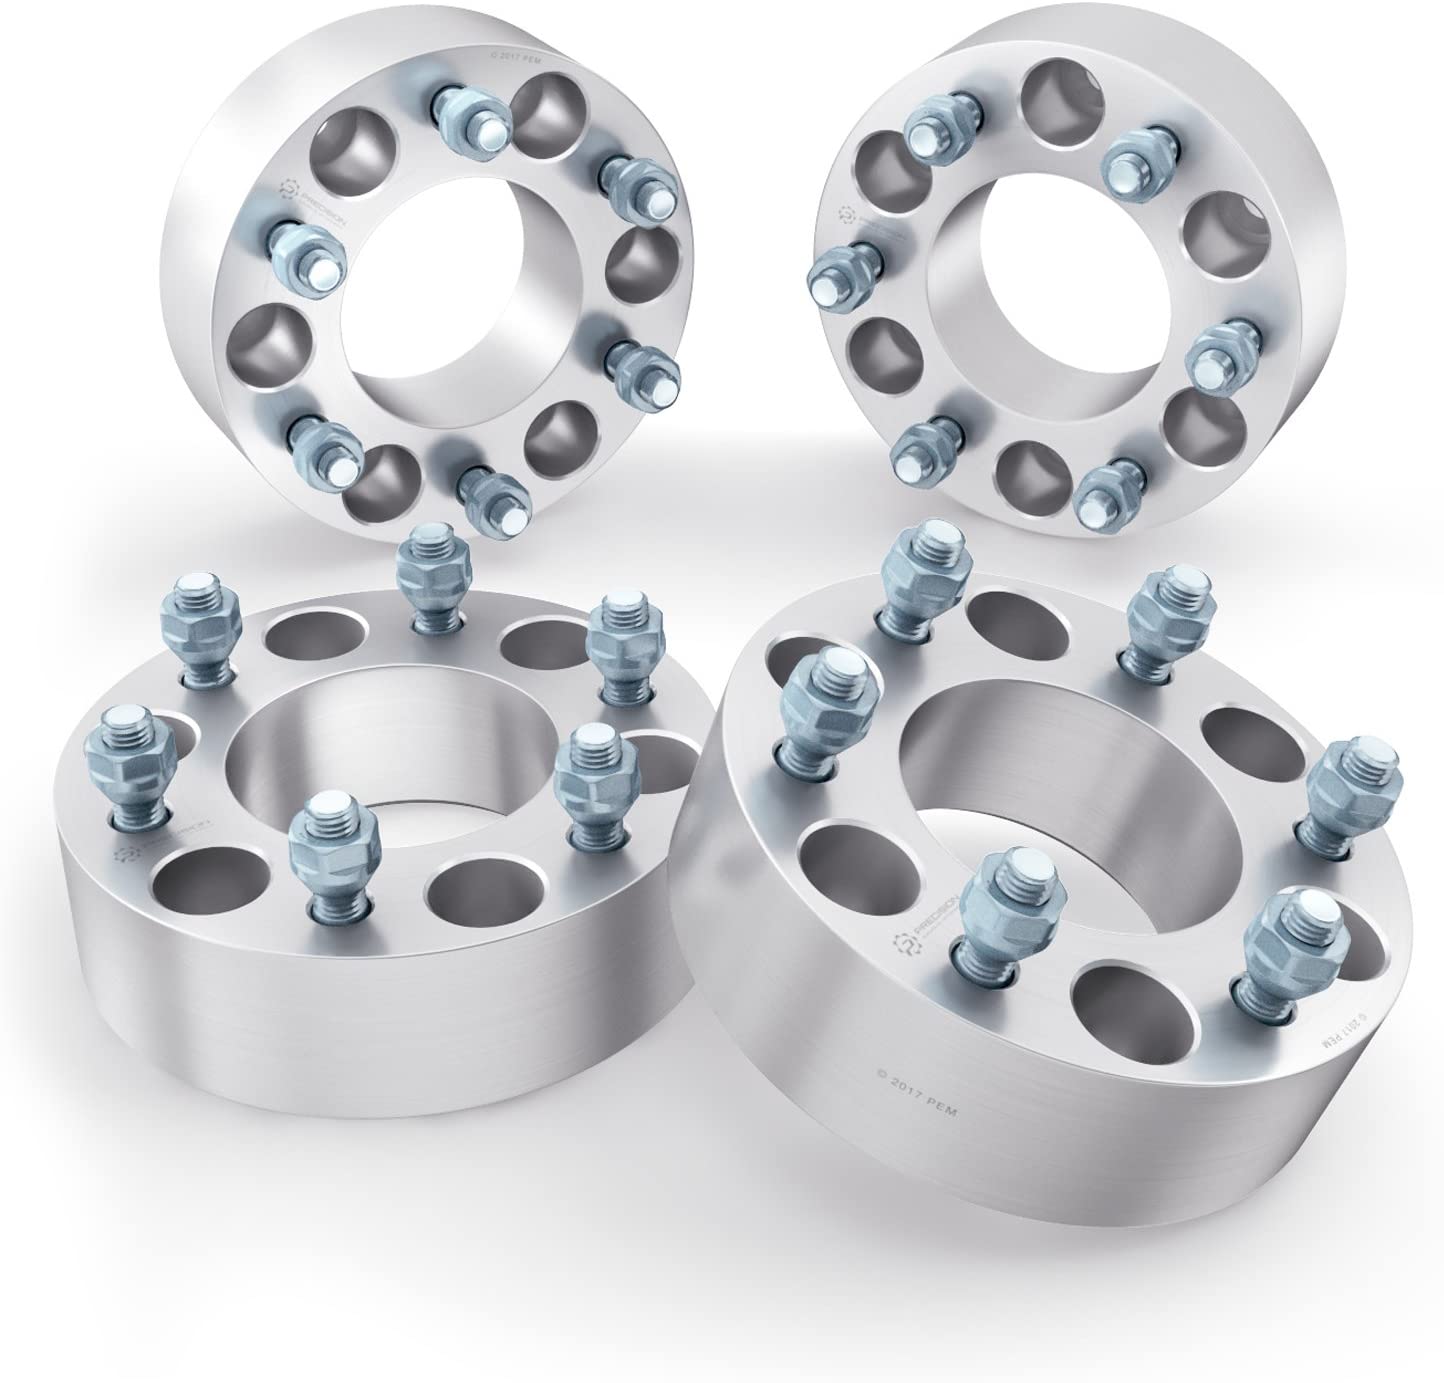 2x Lug Centric Wheel Spacers for 6-Lug Hubs - Bolt On (Thick)